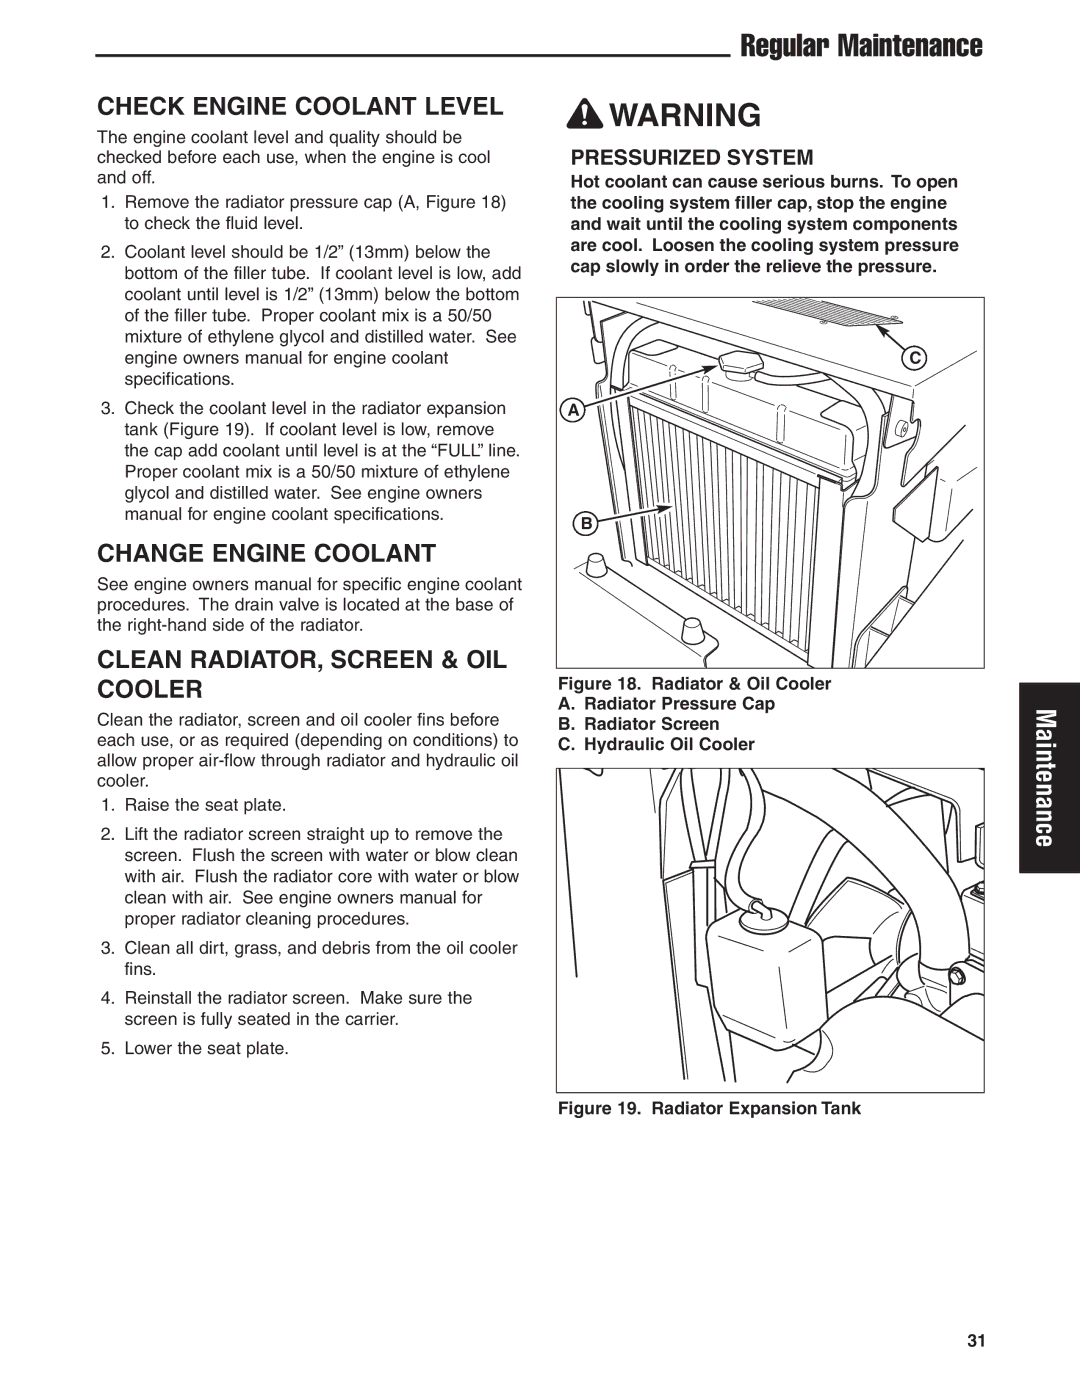 Briggs & Stratton 5900619 manual Check Engine Coolant Level, Change Engine Coolant Clean RADIATOR, Screen & OIL Cooler 